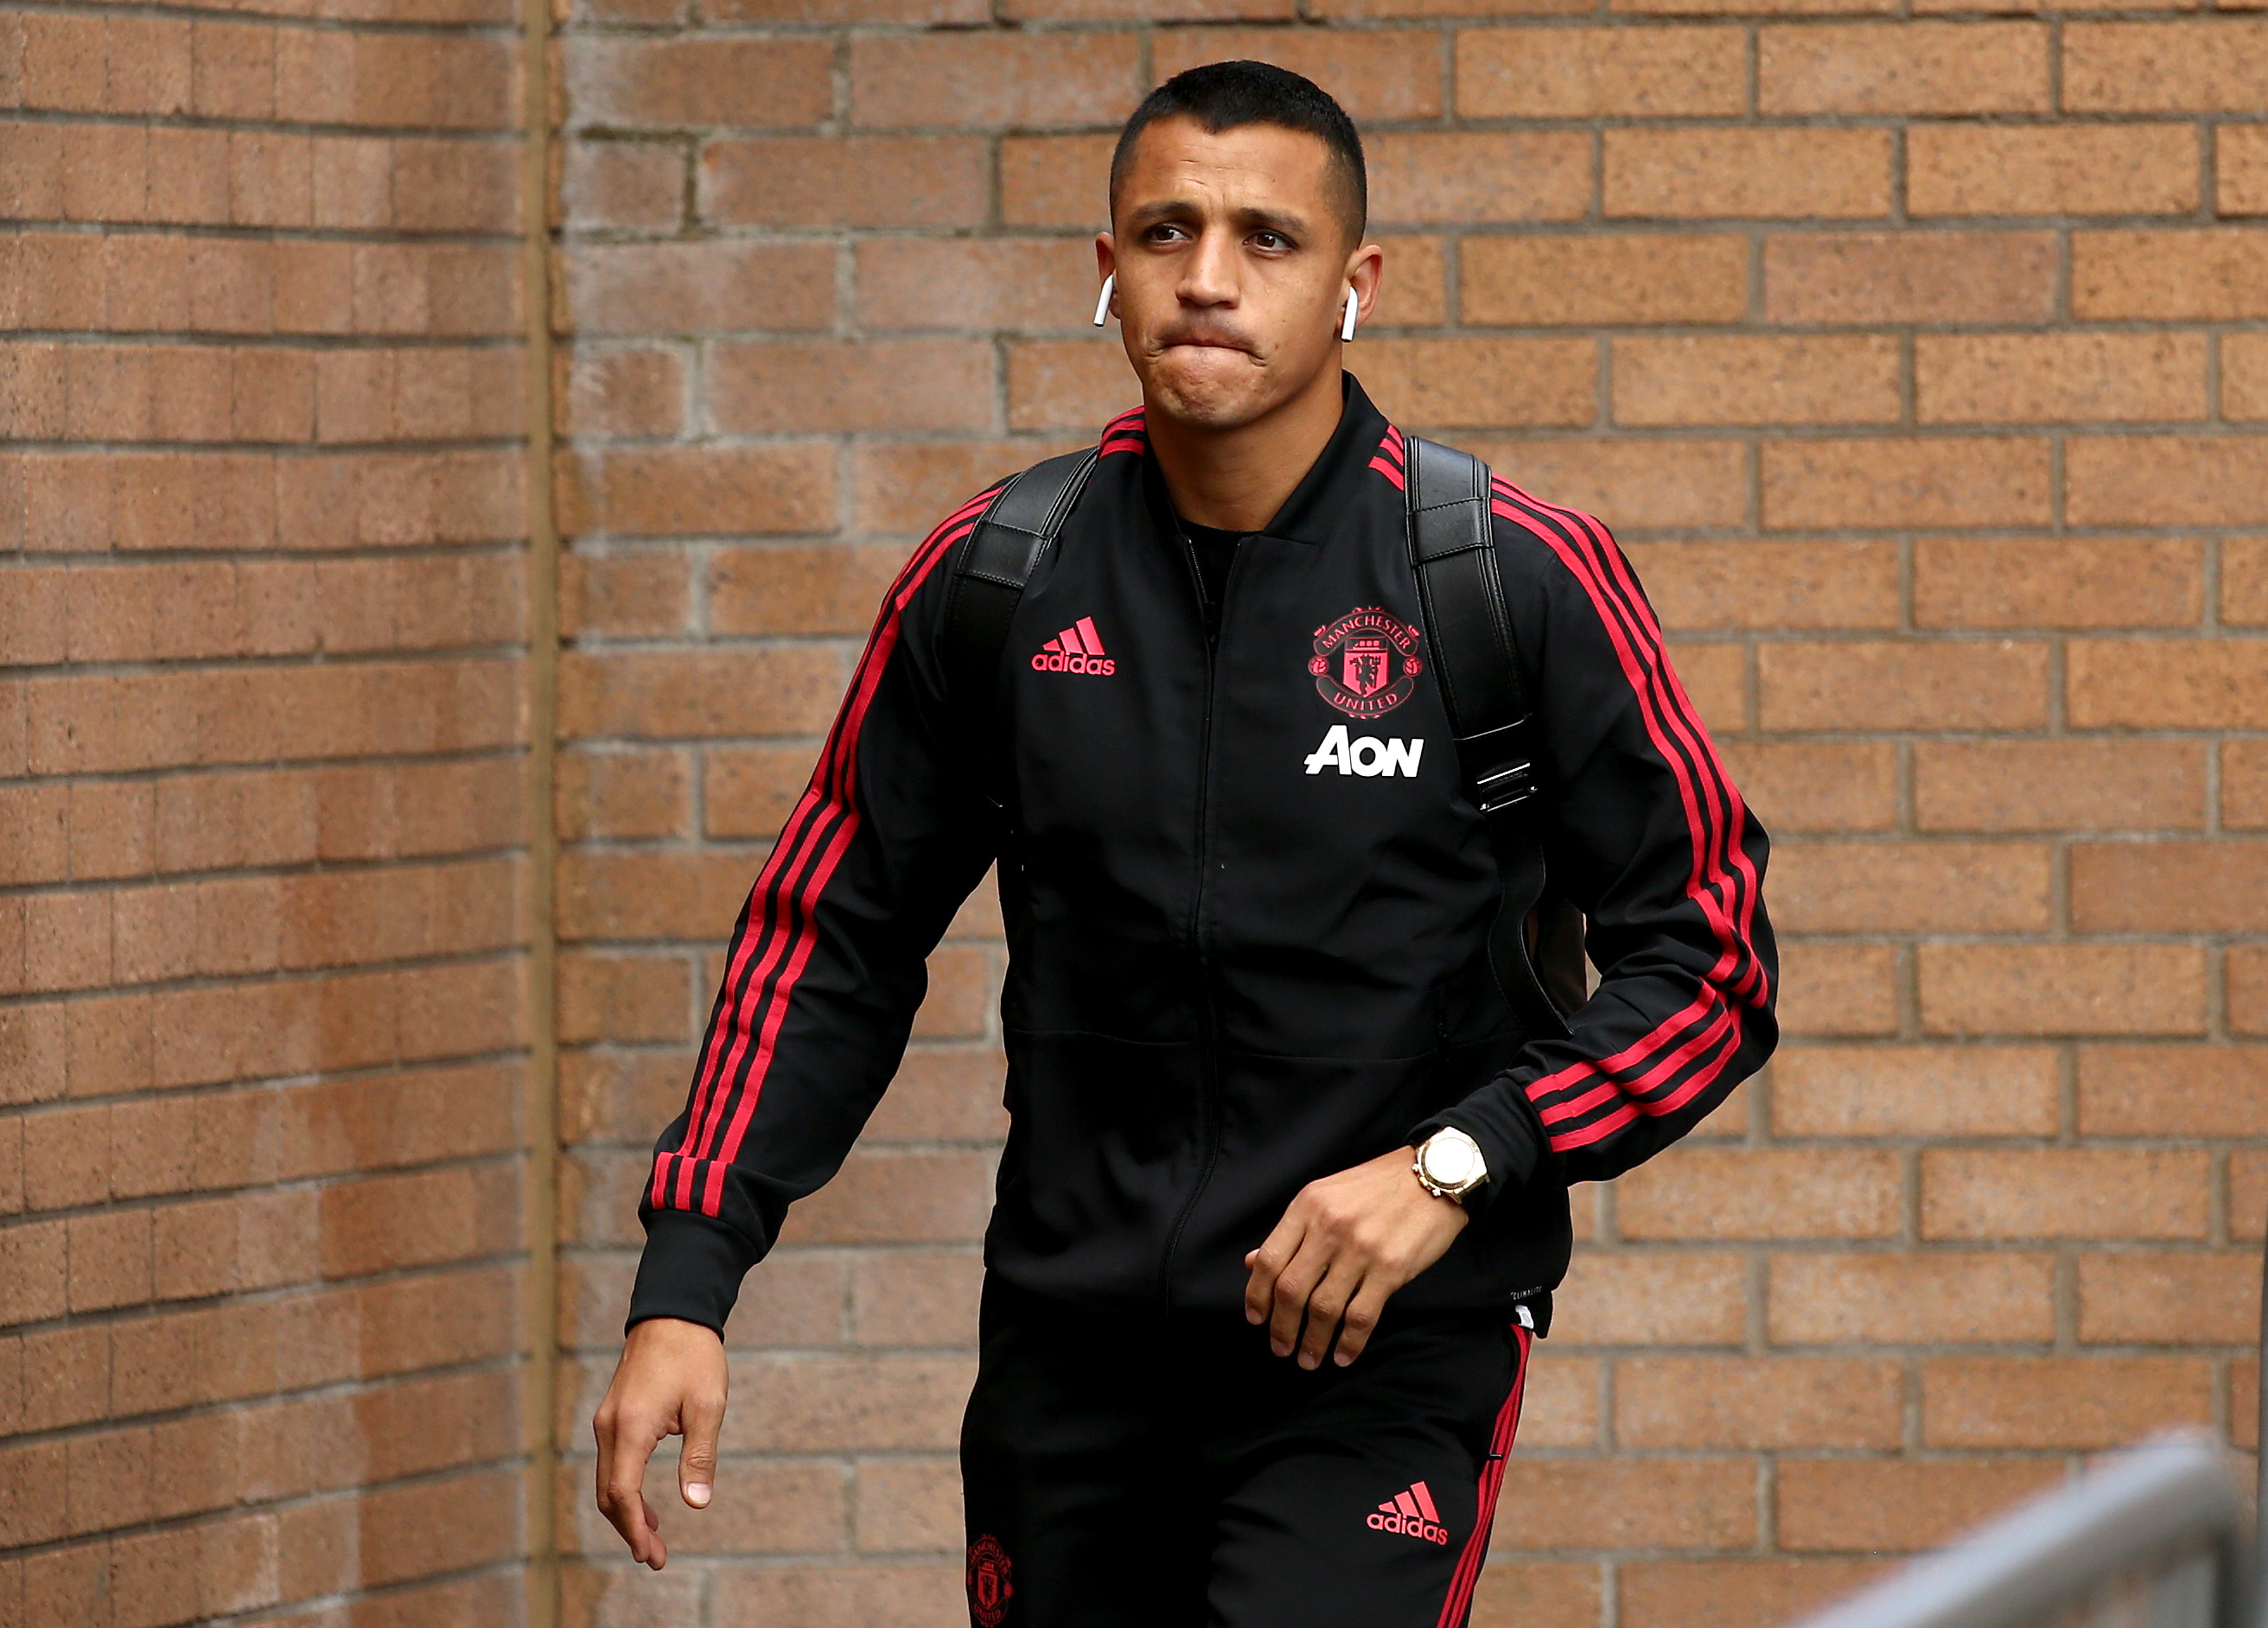 BURNLEY, ENGLAND - SEPTEMBER 02:  Alexis Sanchez of Manchester United arrives prior to the Premier League match between Burnley FC and Manchester United at Turf Moor on September 2, 2018 in Burnley, United Kingdom.  (Photo by Jan Kruger/Getty Images)